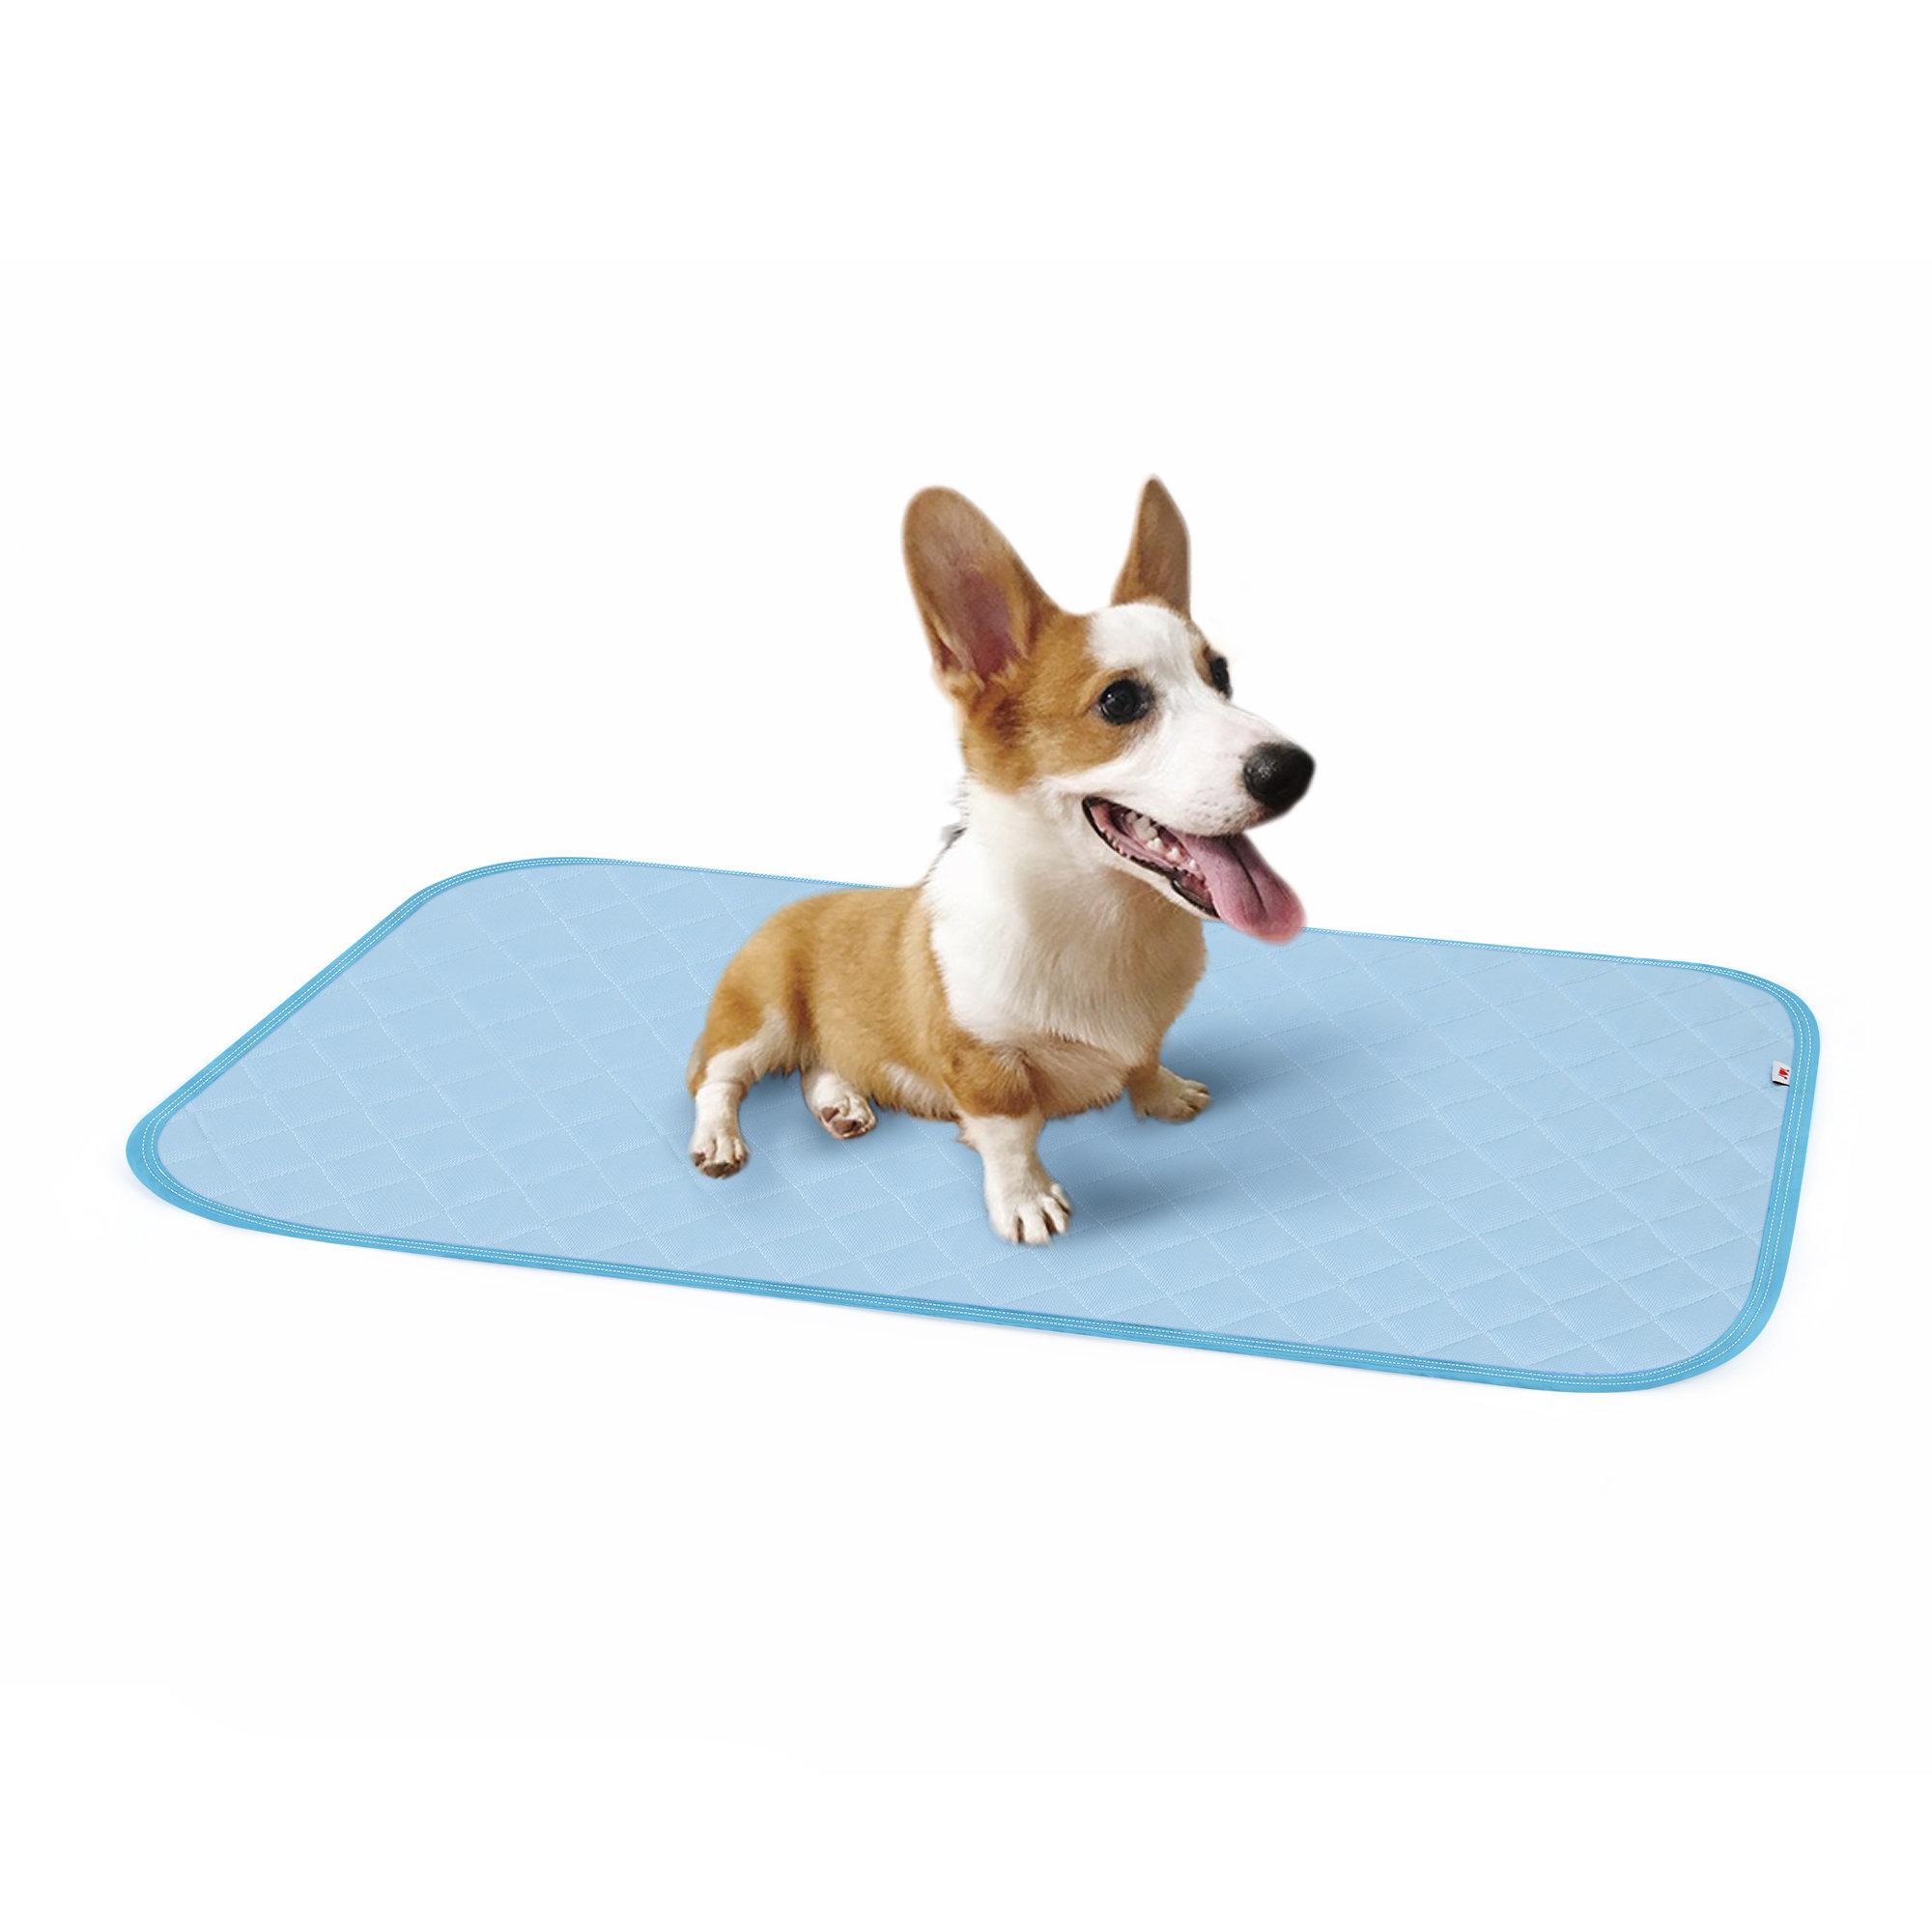 PAIGTEK Dog Cooling Mat - Extra Large Thicken Self Cooling Mat for Small  Medium Large Dogs,Easy Washable,Water Absorption Top,Materials Safe